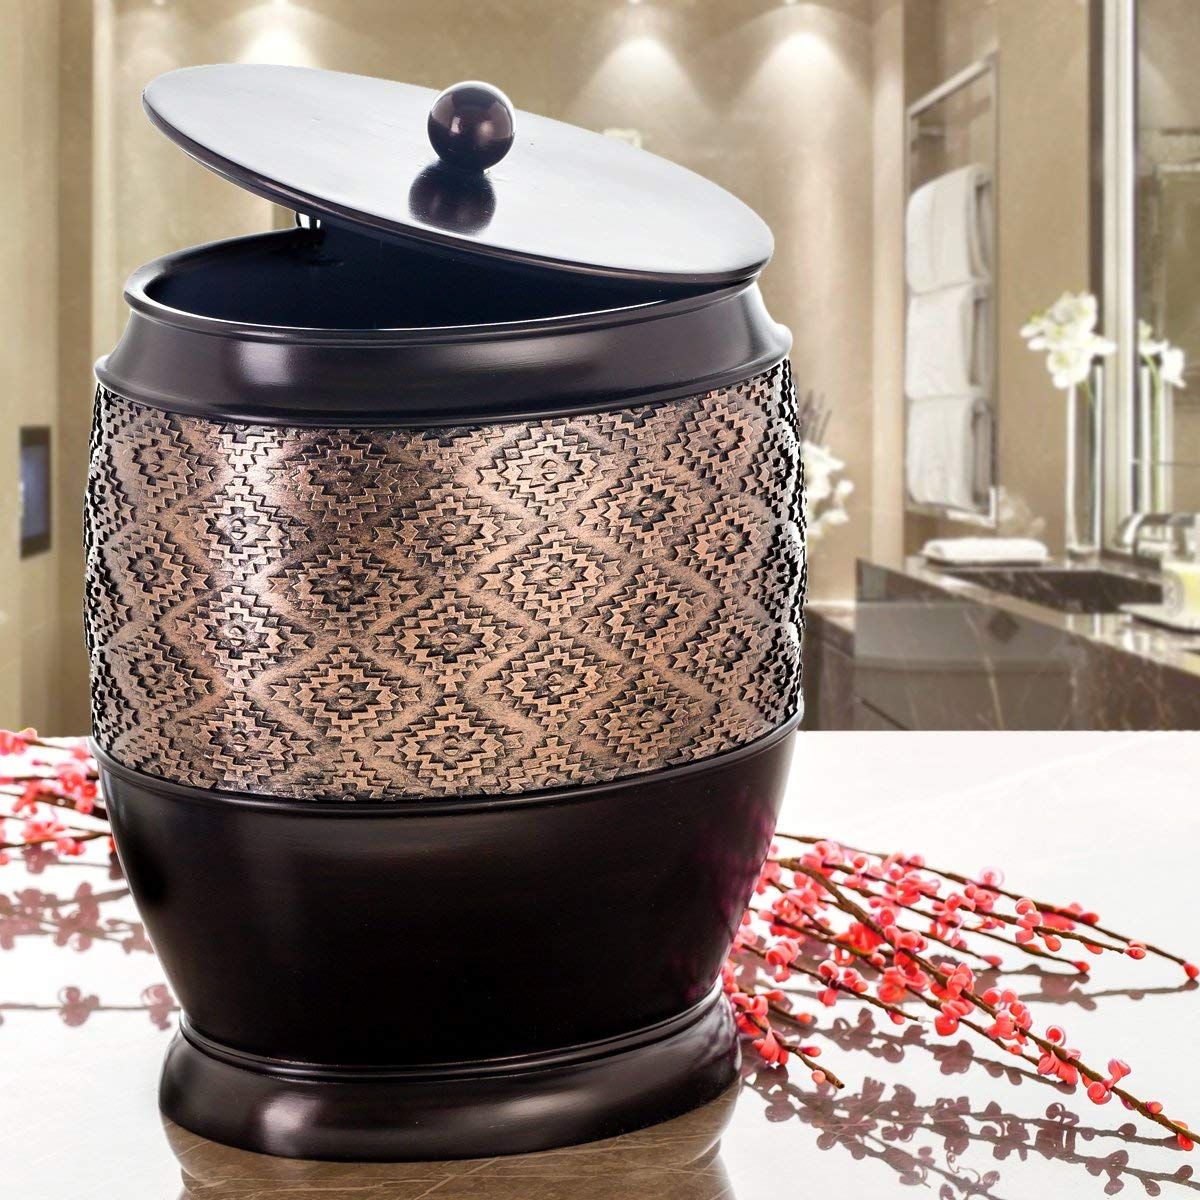 Dublin Small Trash Can With Lid Decorative Waste Basket, Durable